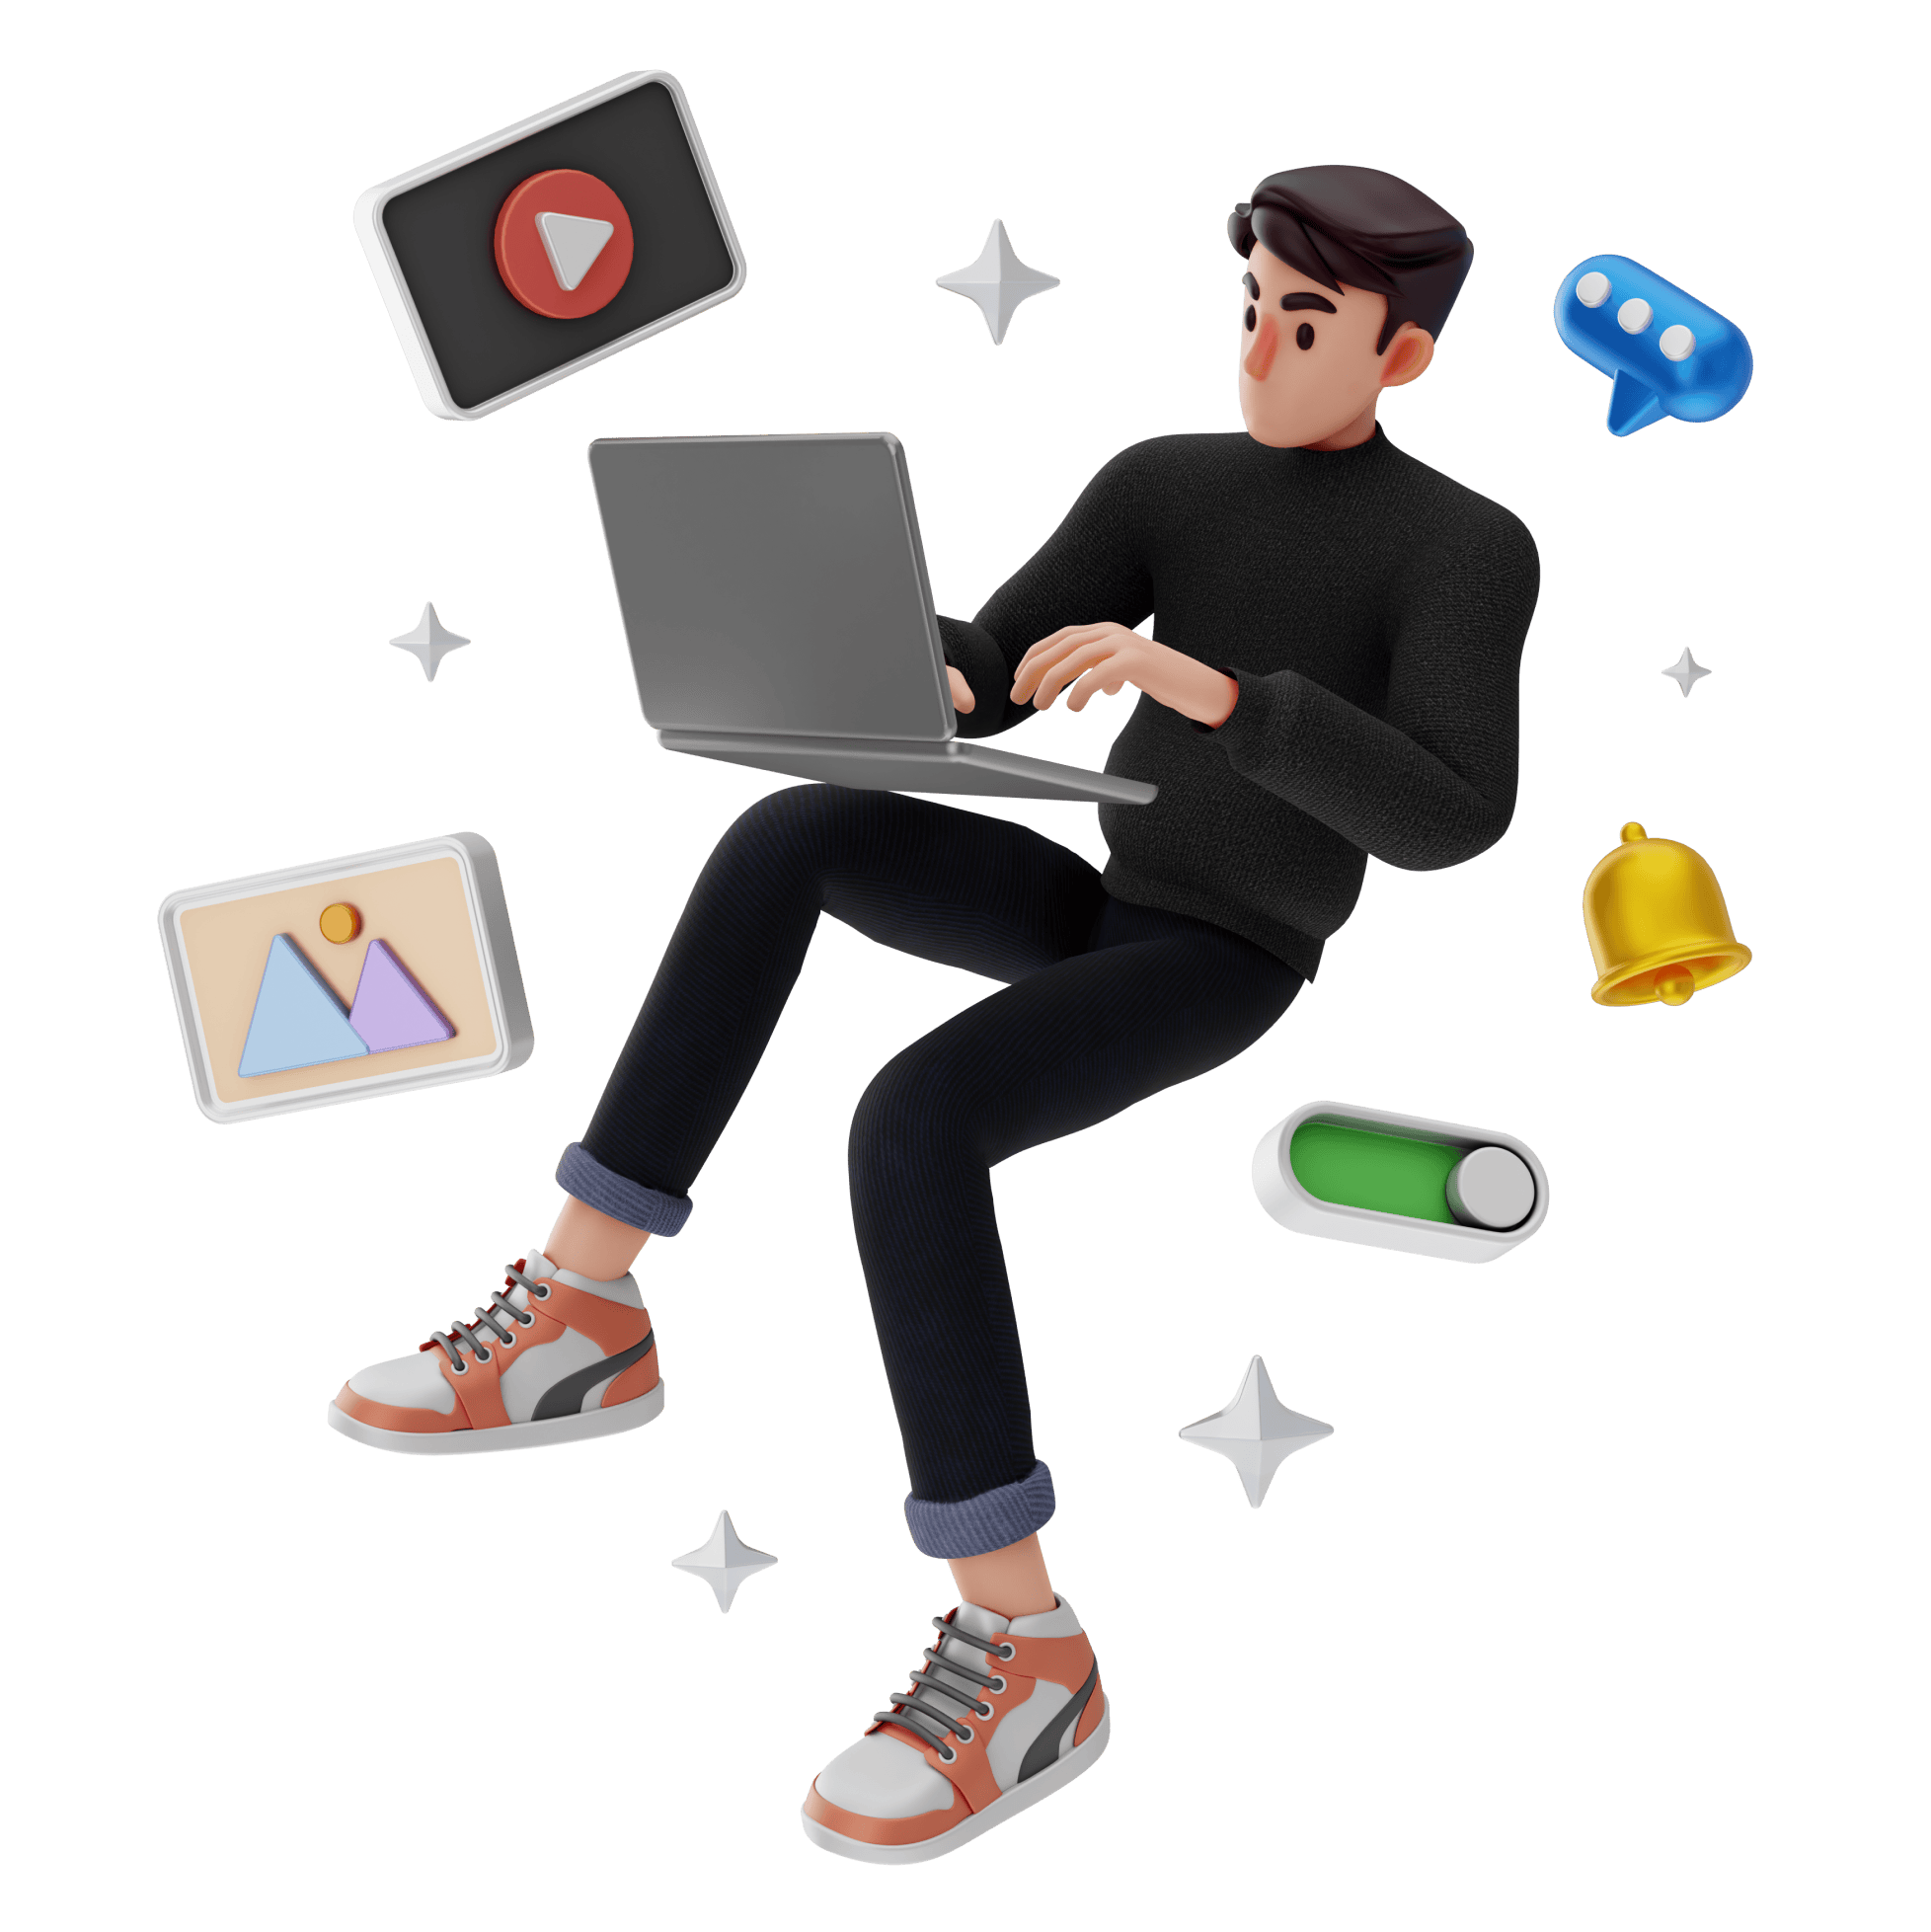 A 3D illustration of an animated character focused on his laptop; floating among digital icons symbolizing software tasks.